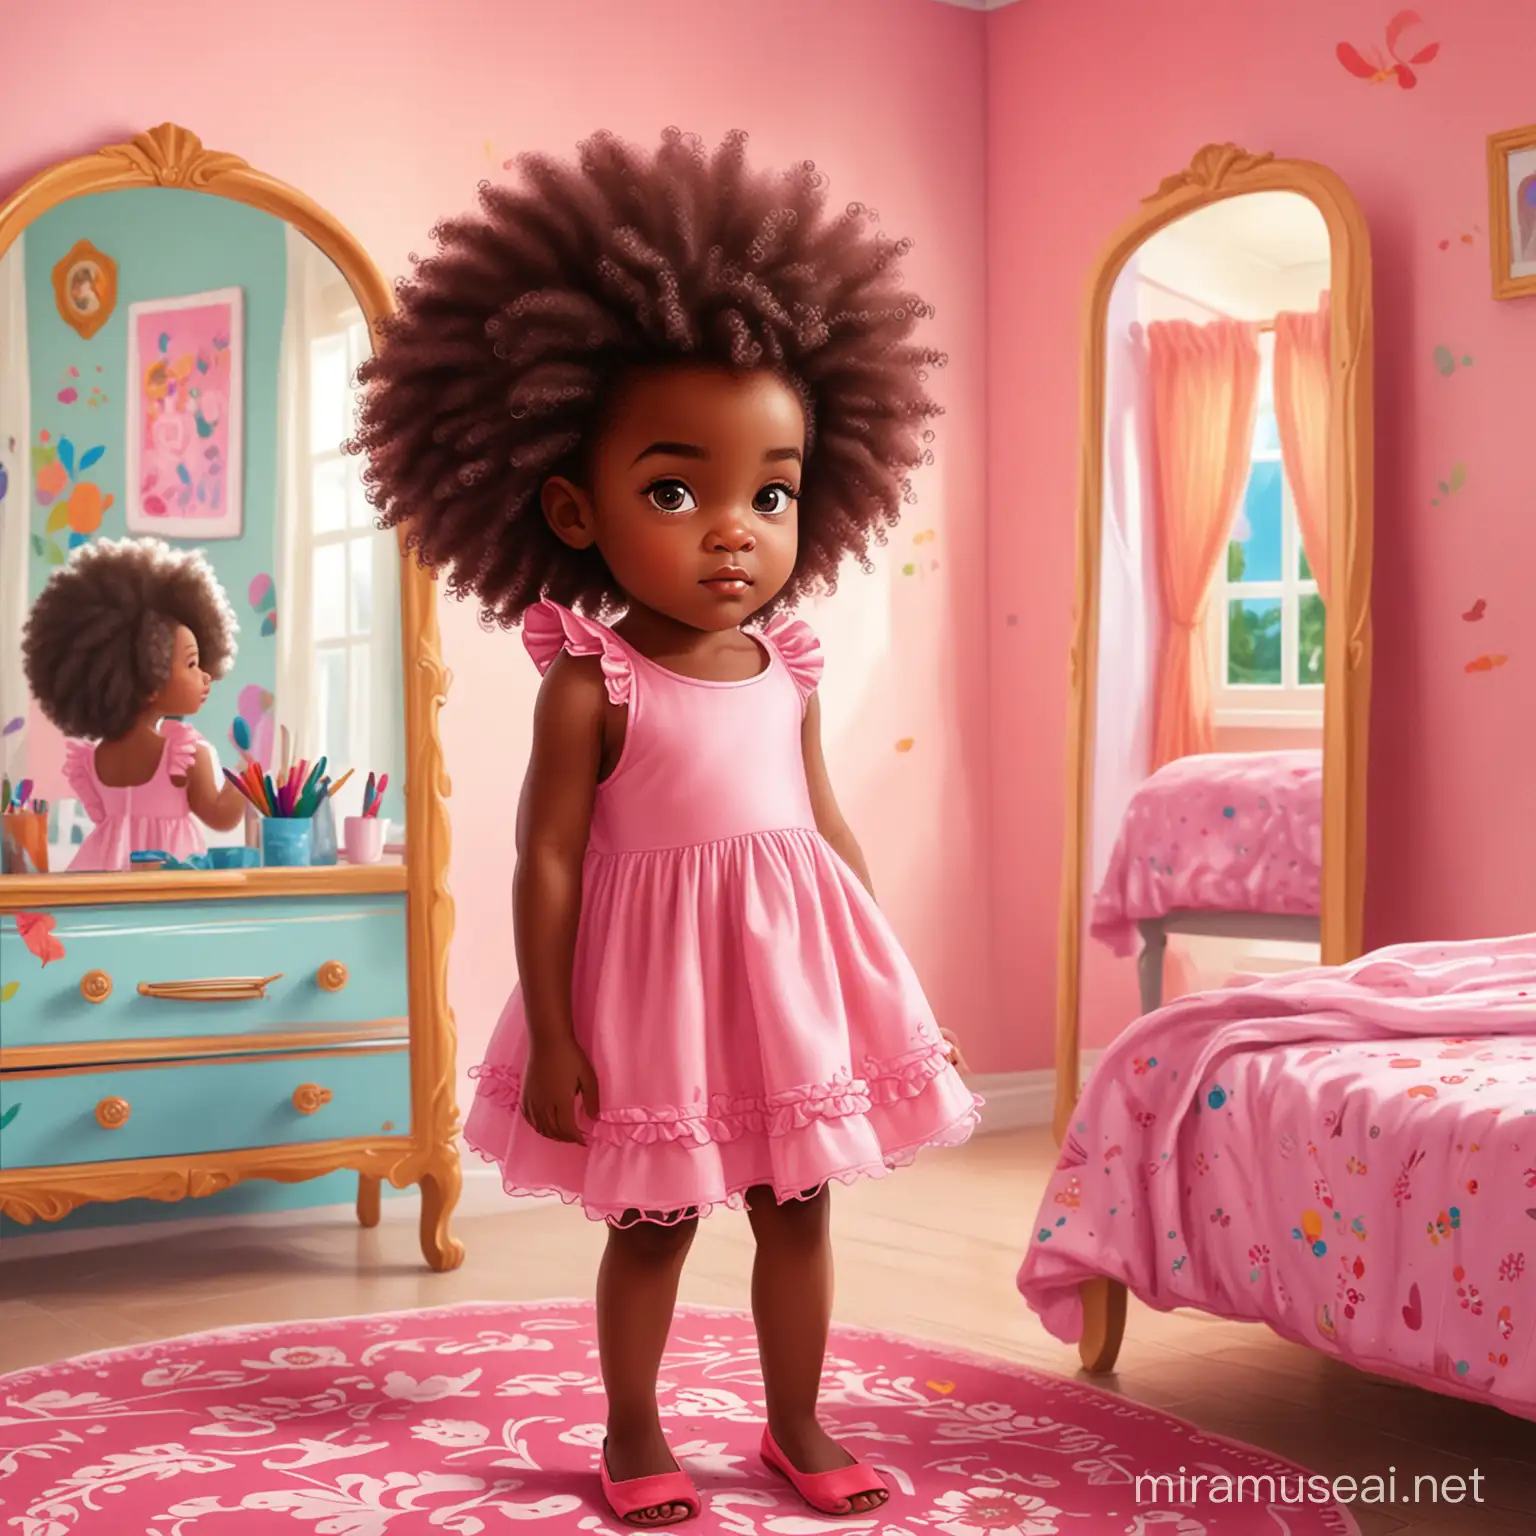 Afro black girl in pink dress staring in mirror in colorful bedroom children book illustration